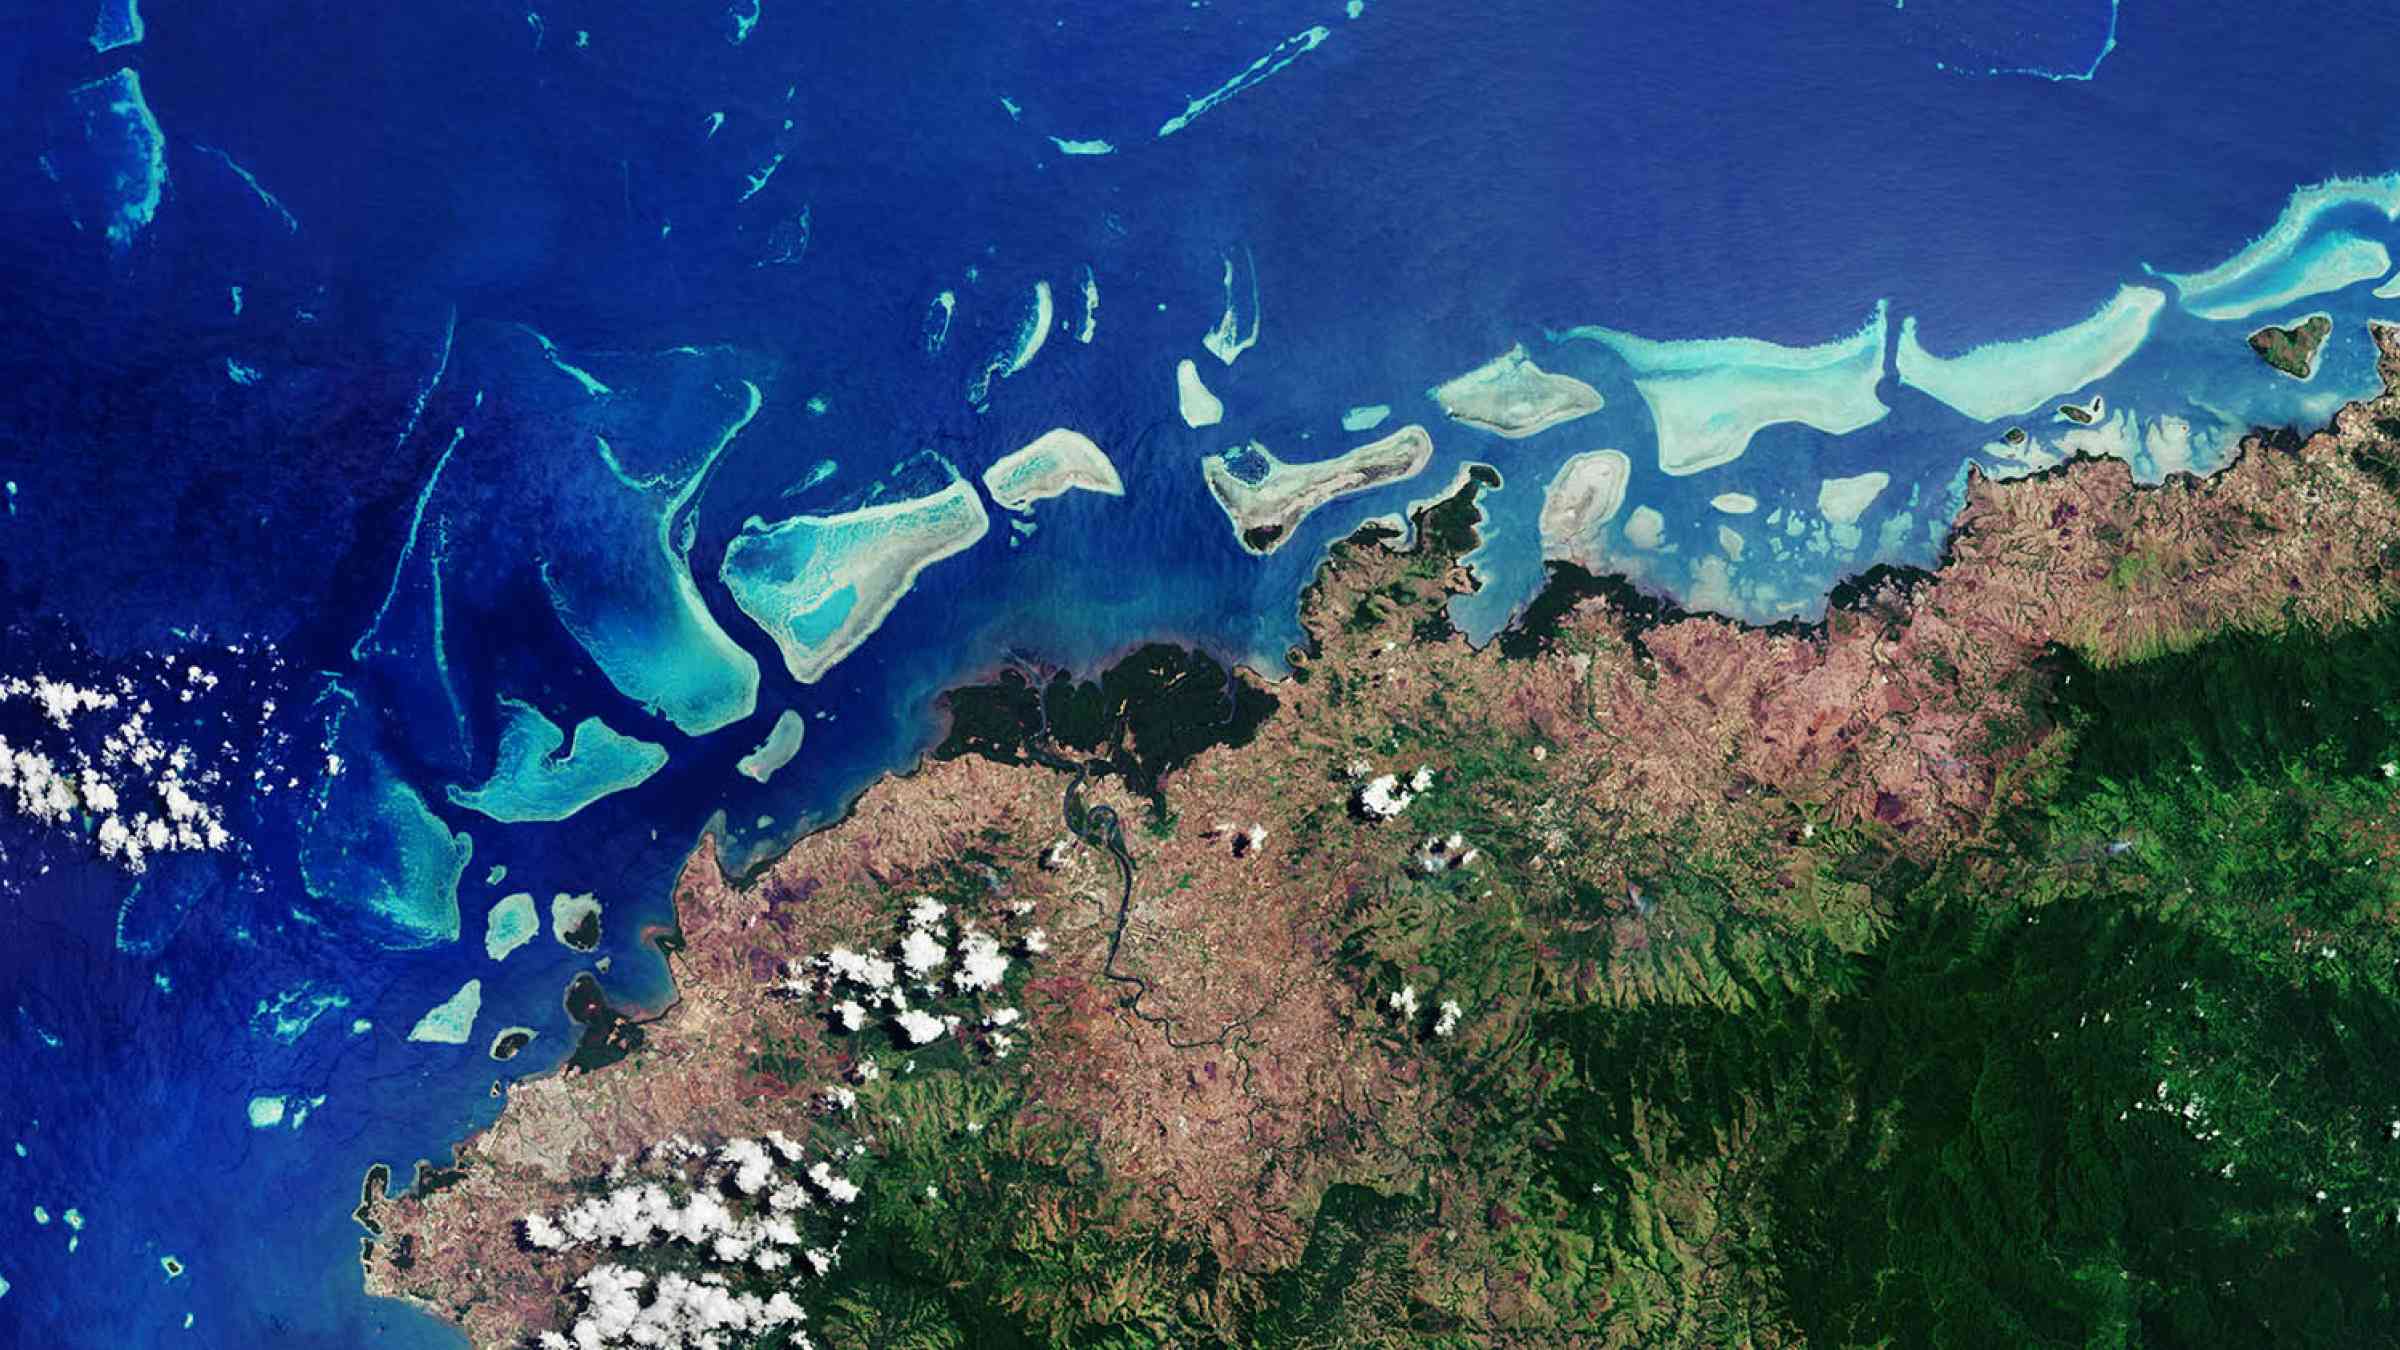 View from space on Fiji in Melanesia in the South Pacific Ocean and its coral reefs